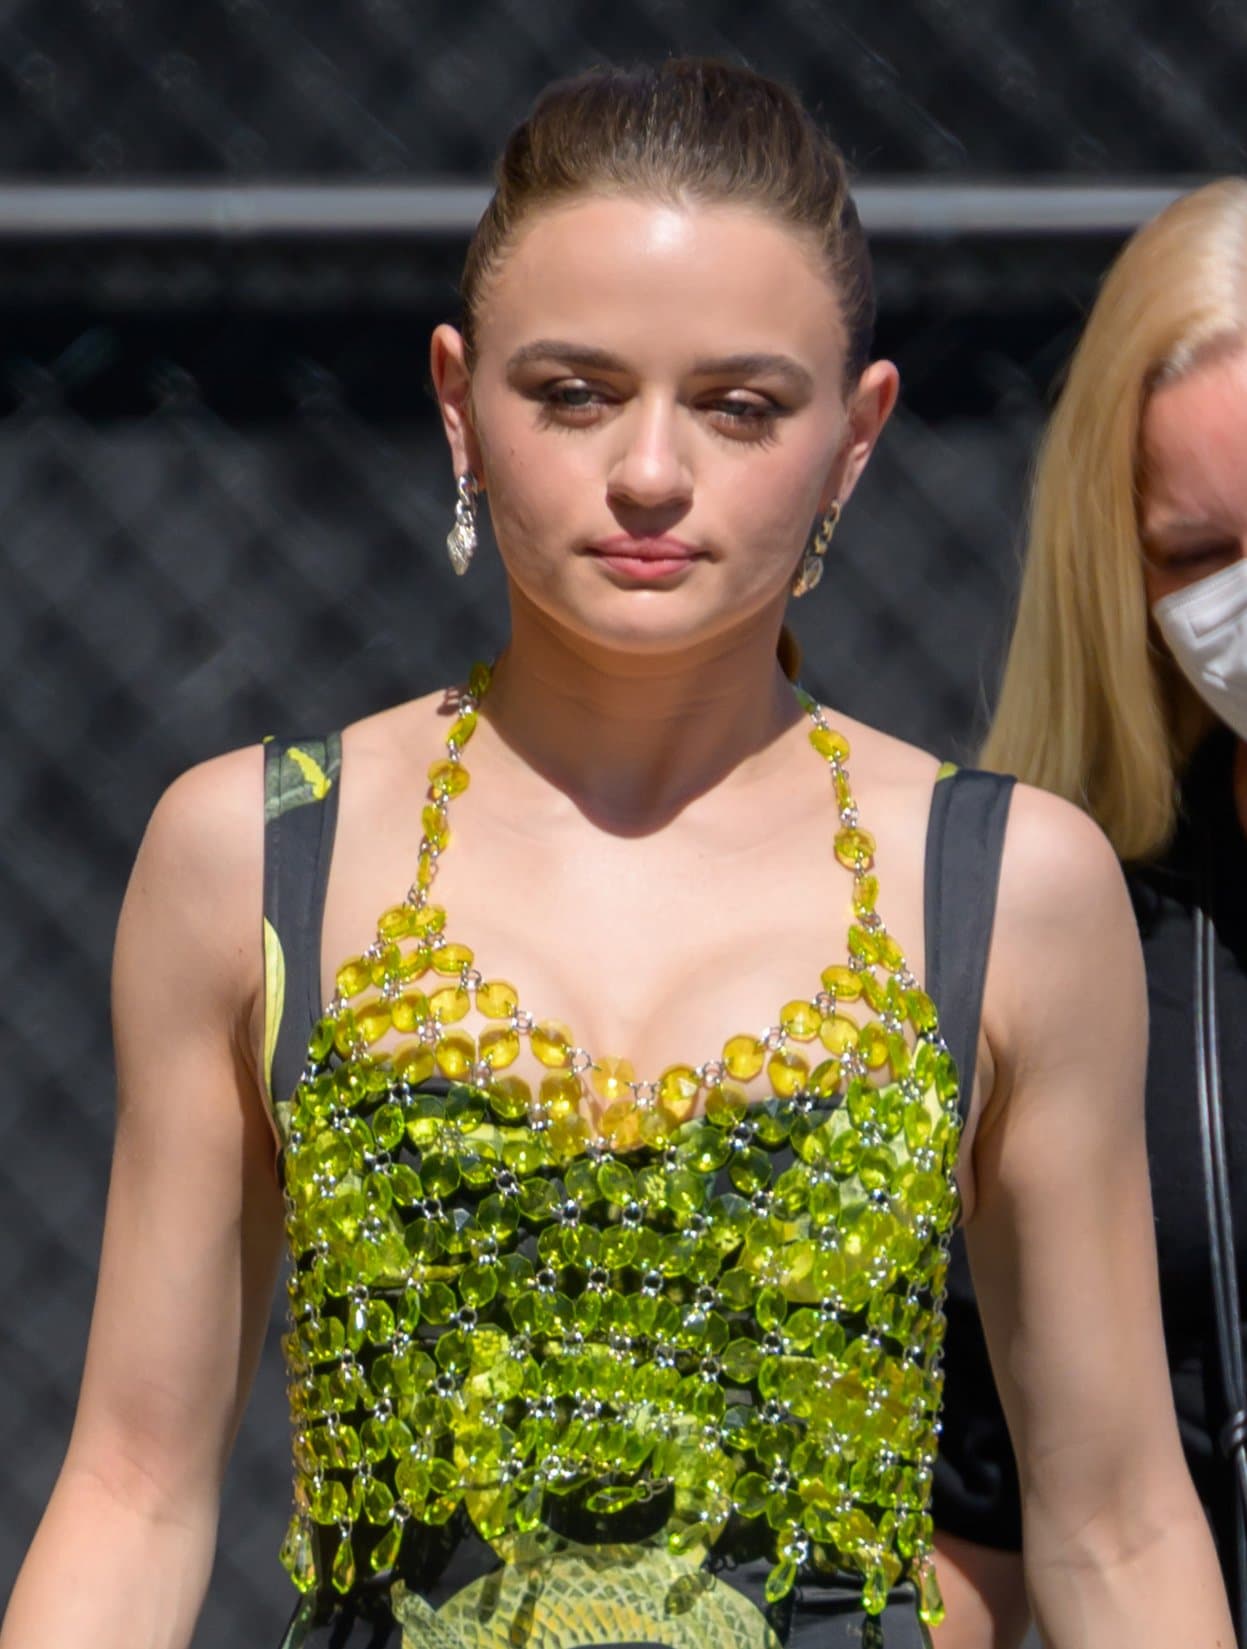 Joey King styles her tresses in a retro ponytail and wears subtle smokey eyeshadow and pink lipstick